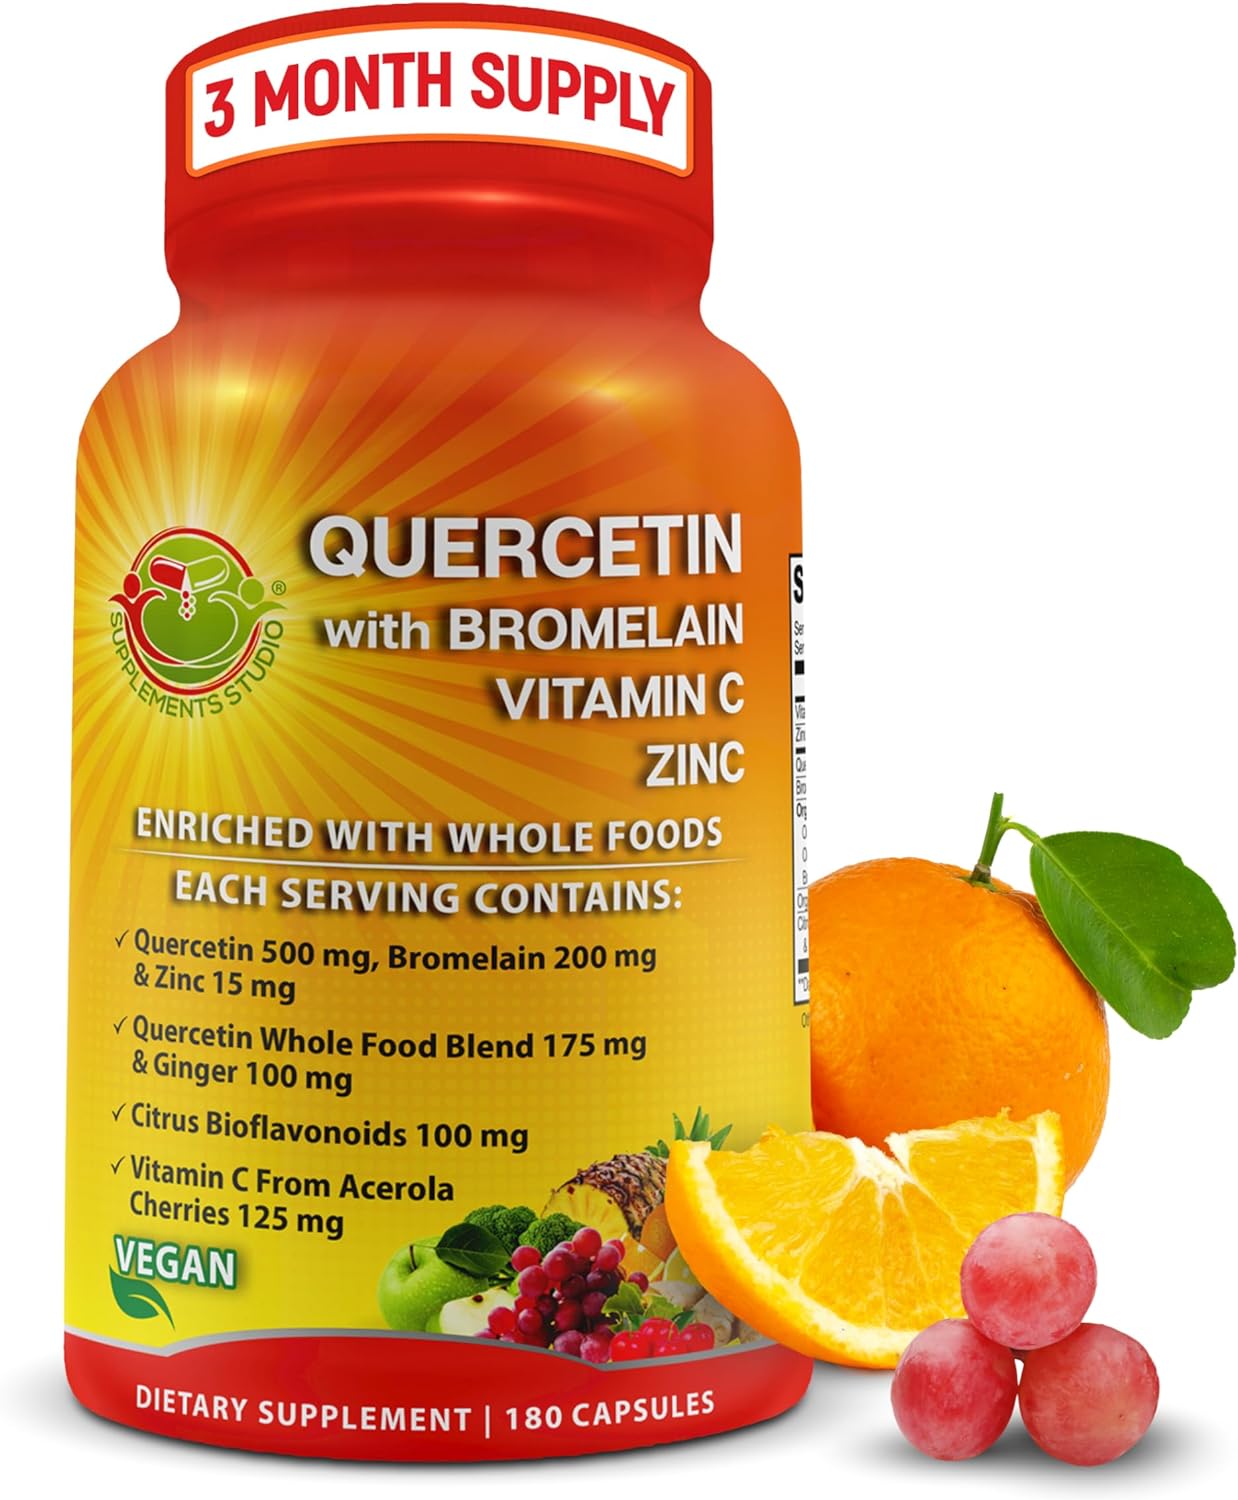 Quercetin with Bromelain Vitamin C and Zinc with Organic Whole Food Quercetin Blend - 1215mg per Serving - Phytosome Quercetin 500mg Capsules with Ginger and Flavonoids for Immune Support - 180 count